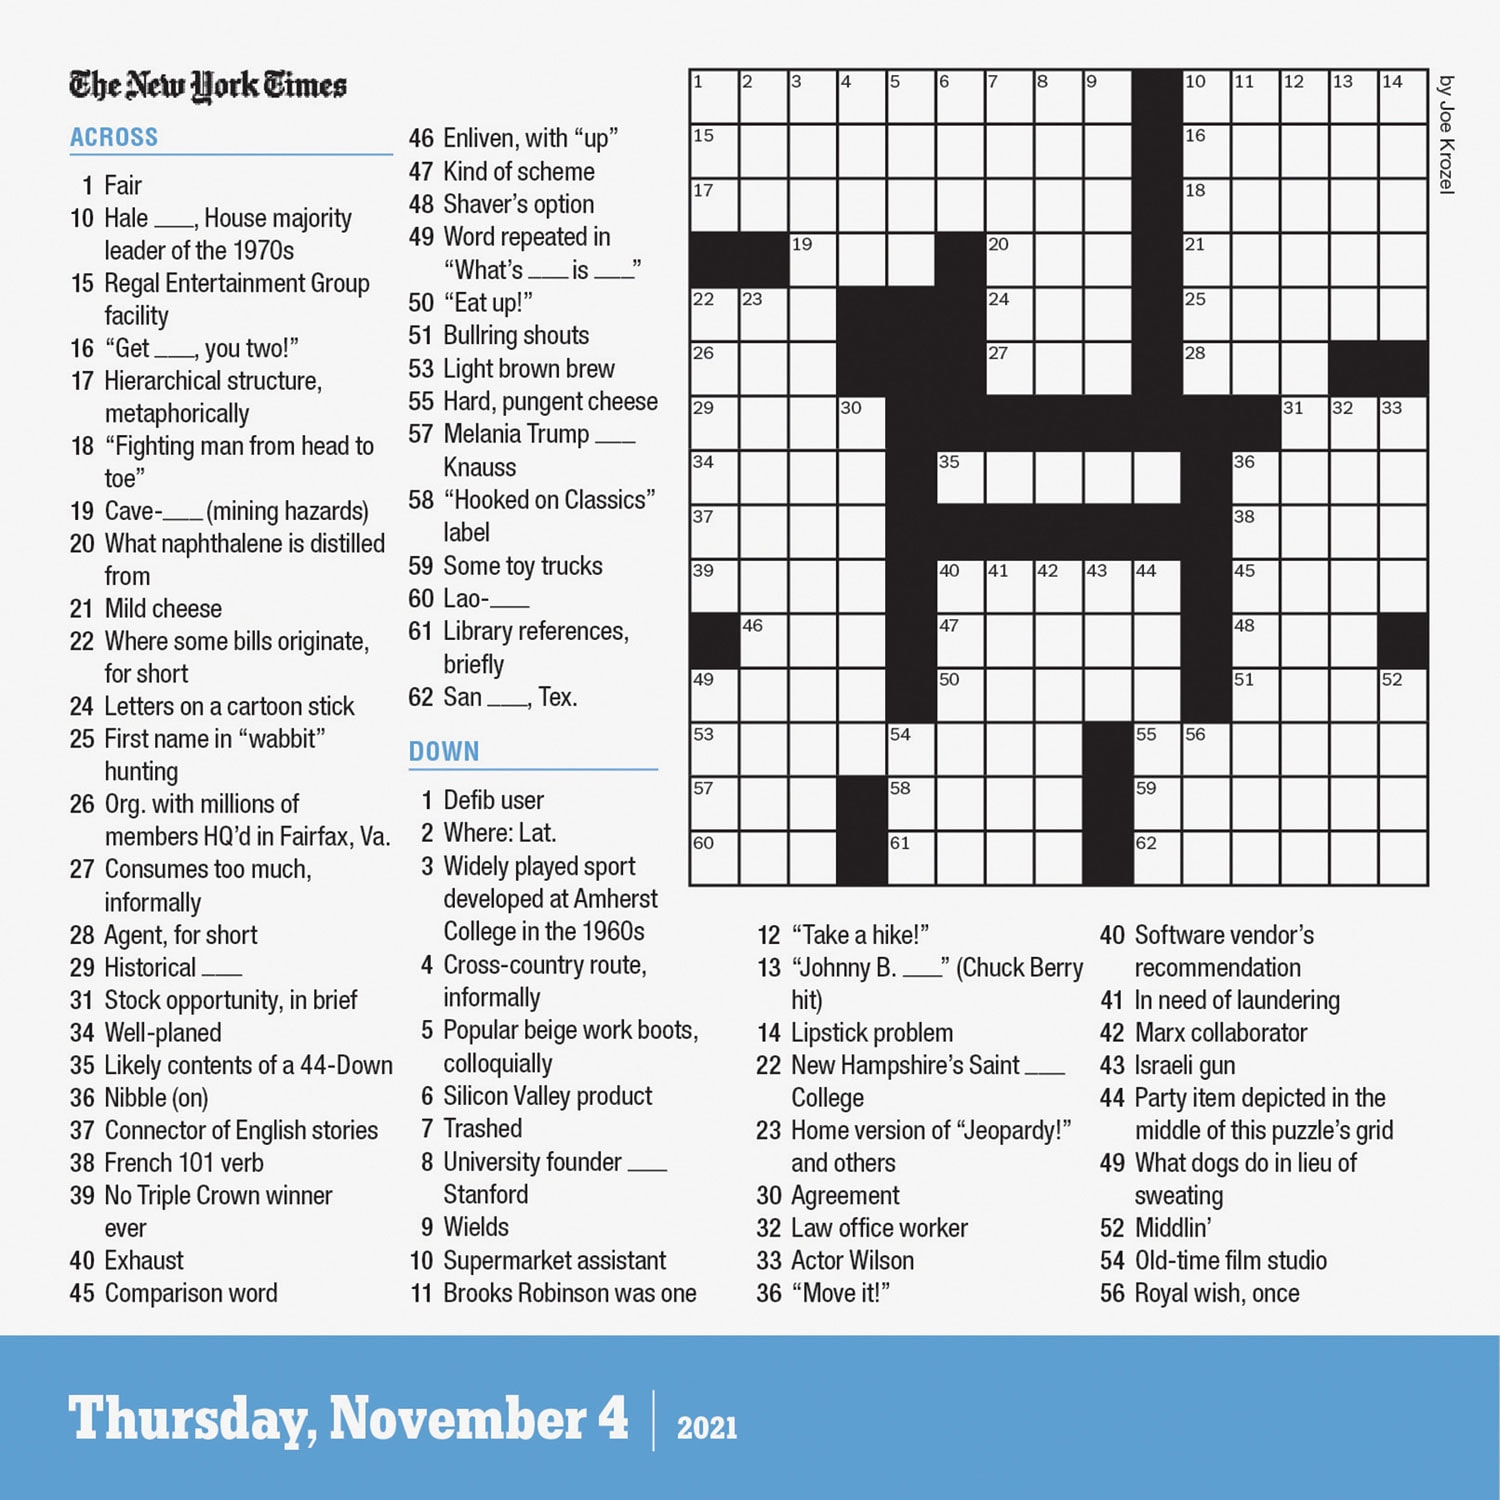 2021 New York Times Daily Crossword Puzzle Calendar 1 Review 5